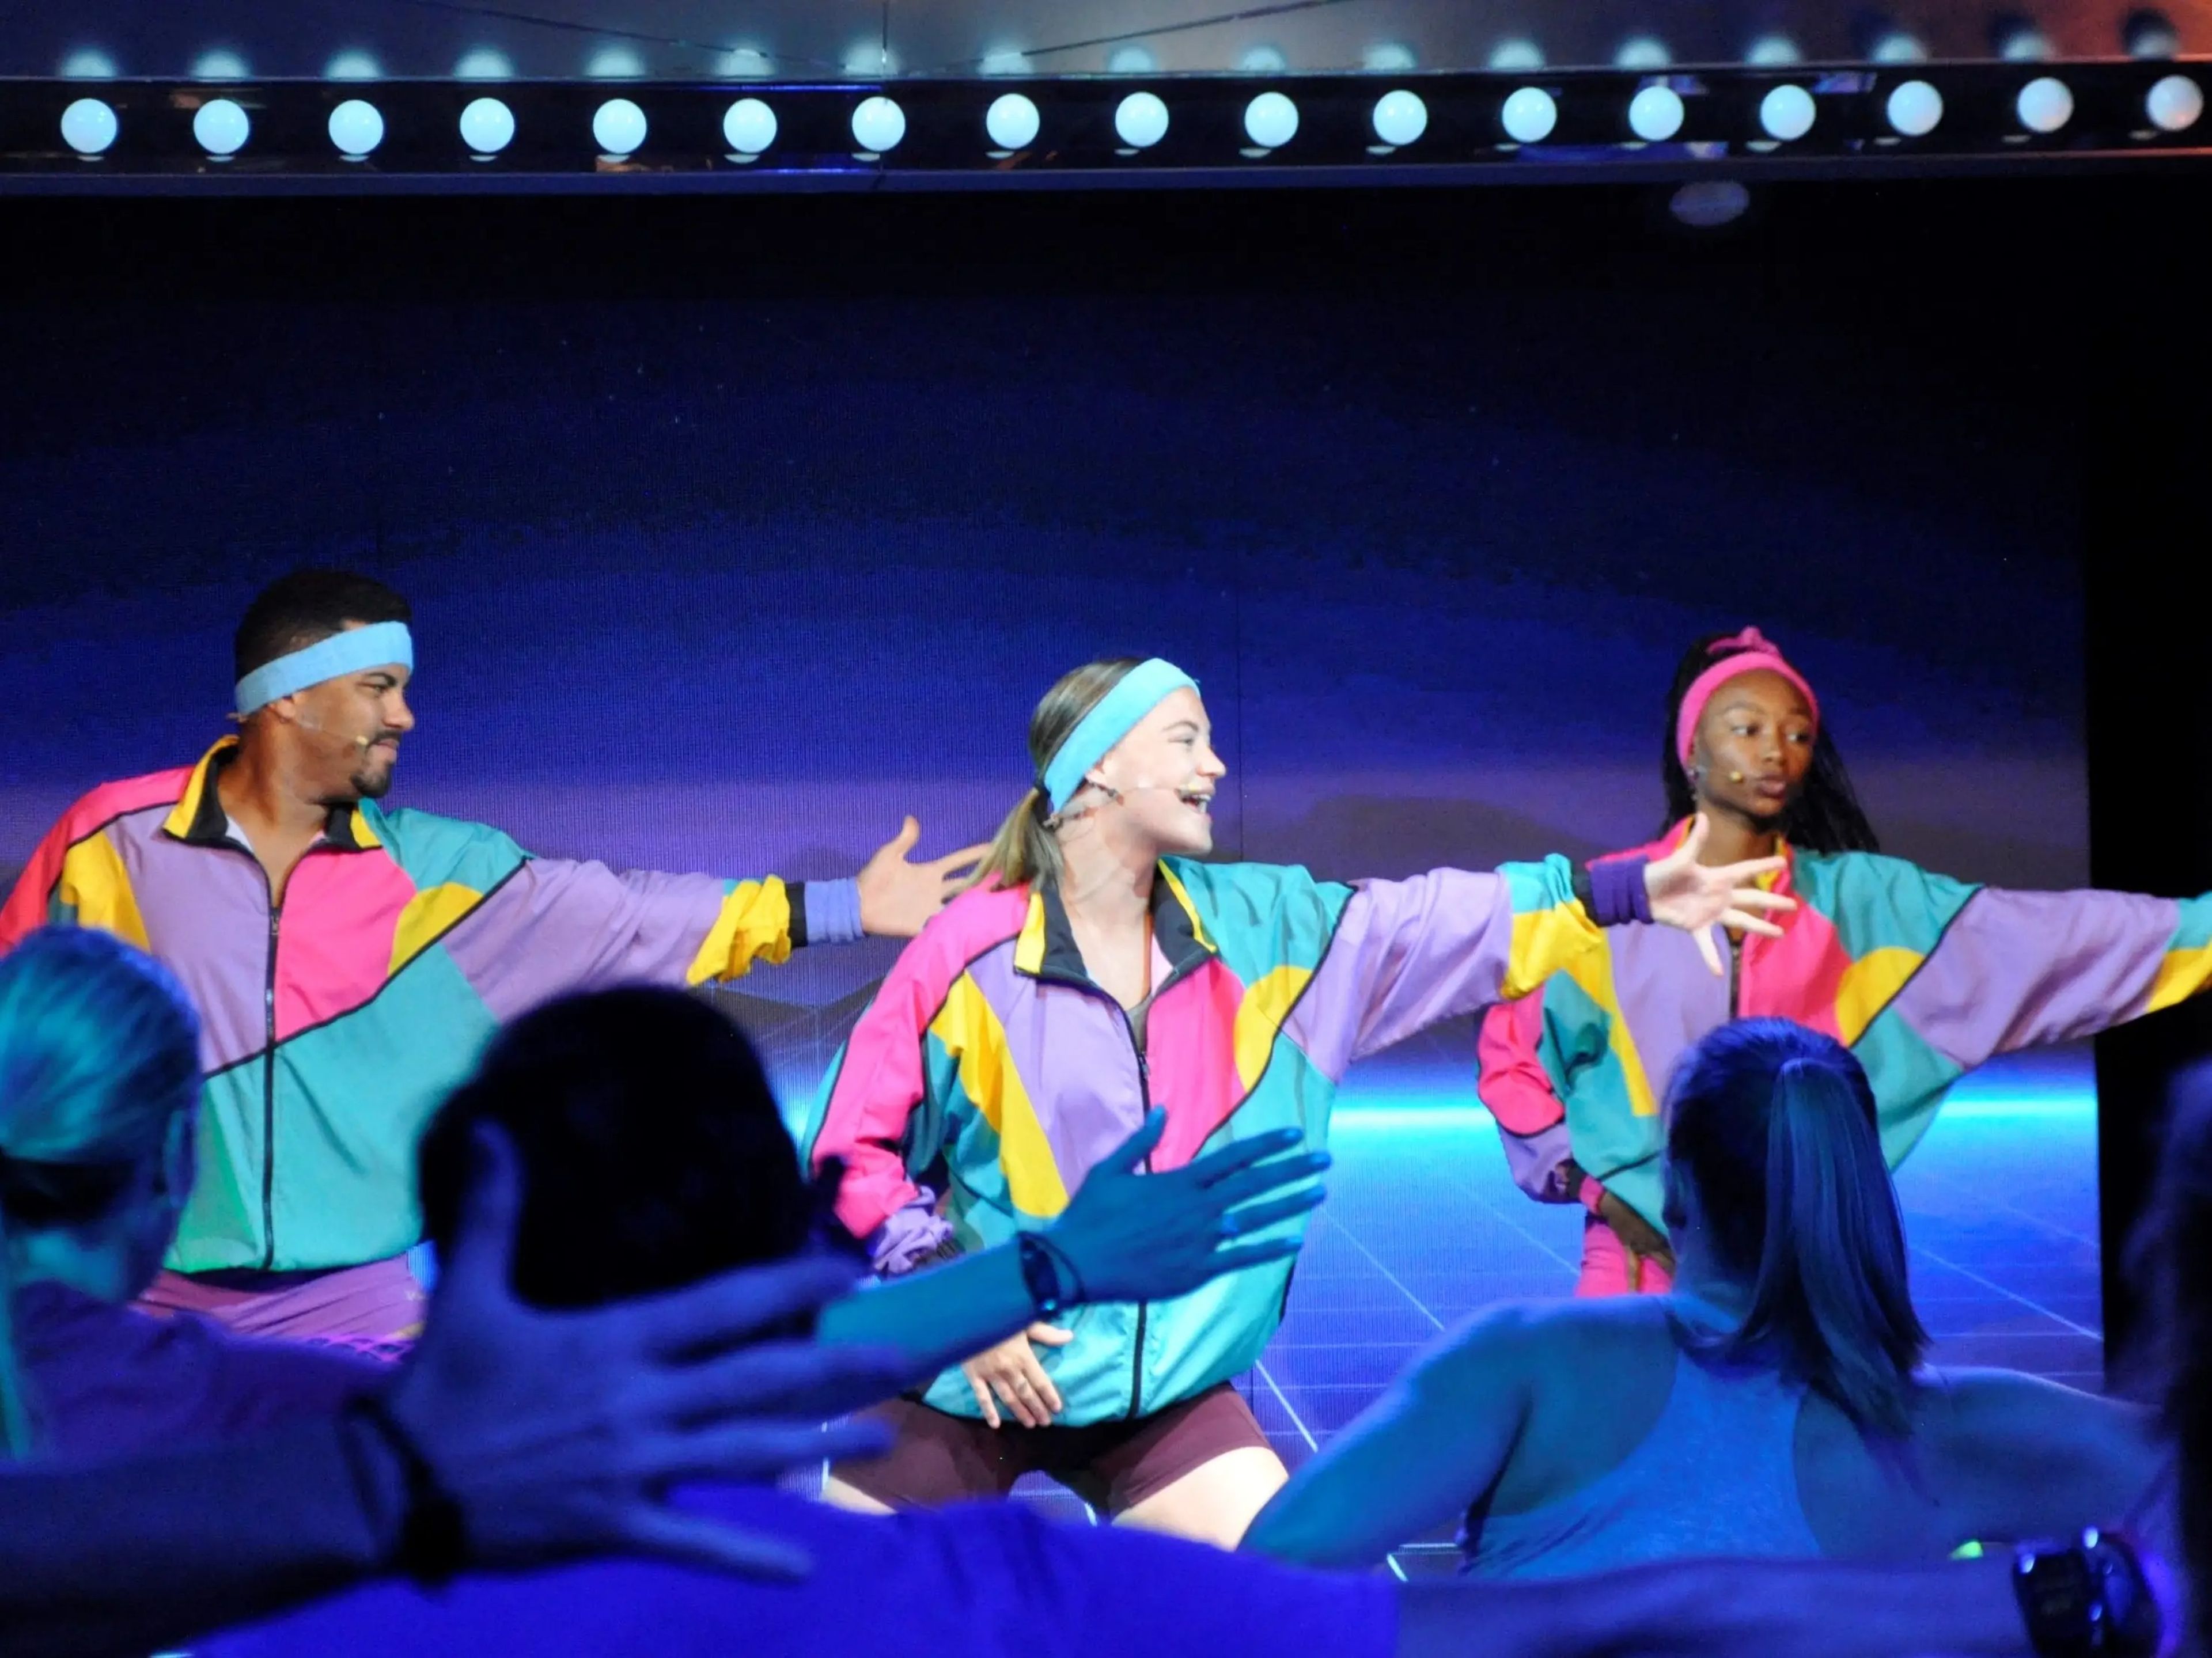 Three people performing in a show wearing neon tracksuits in front of an audience.